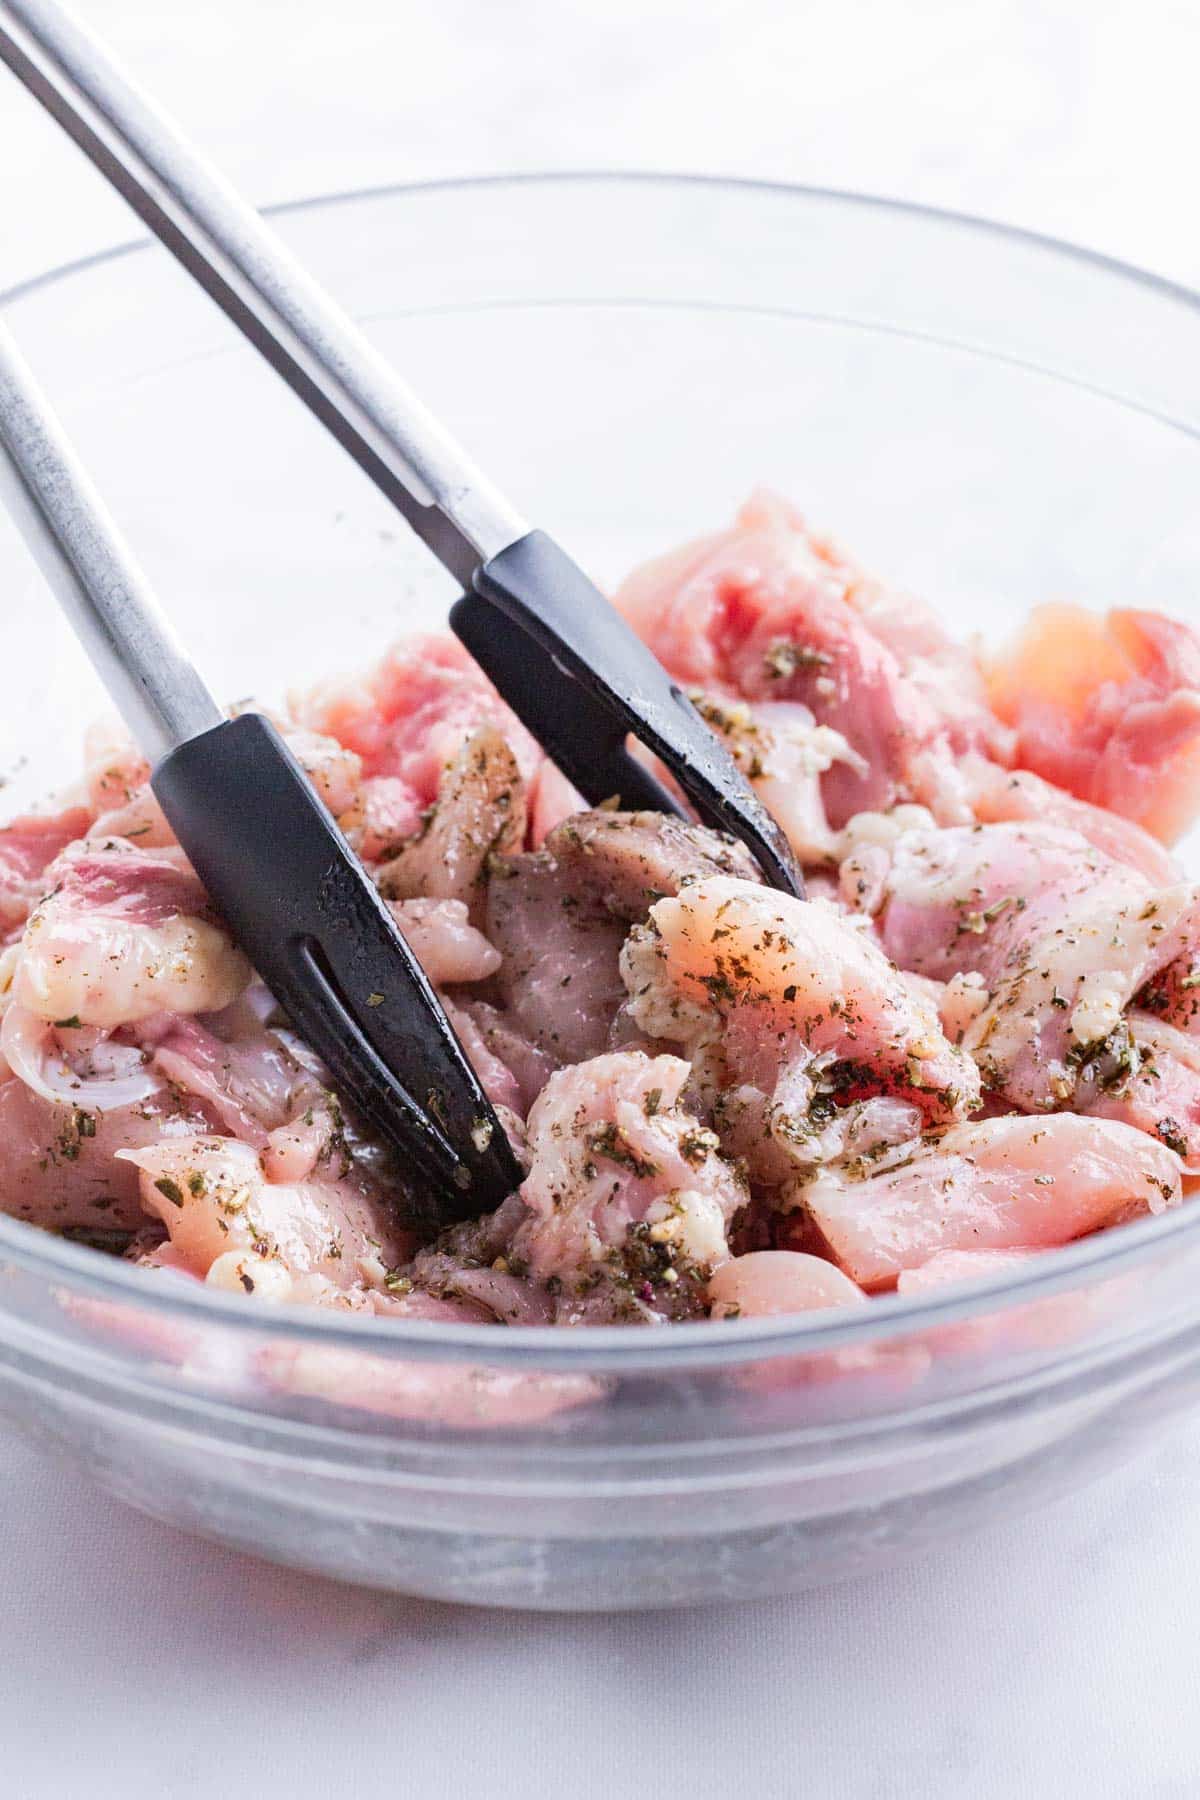 Sliced chicken is marinated before grilling.